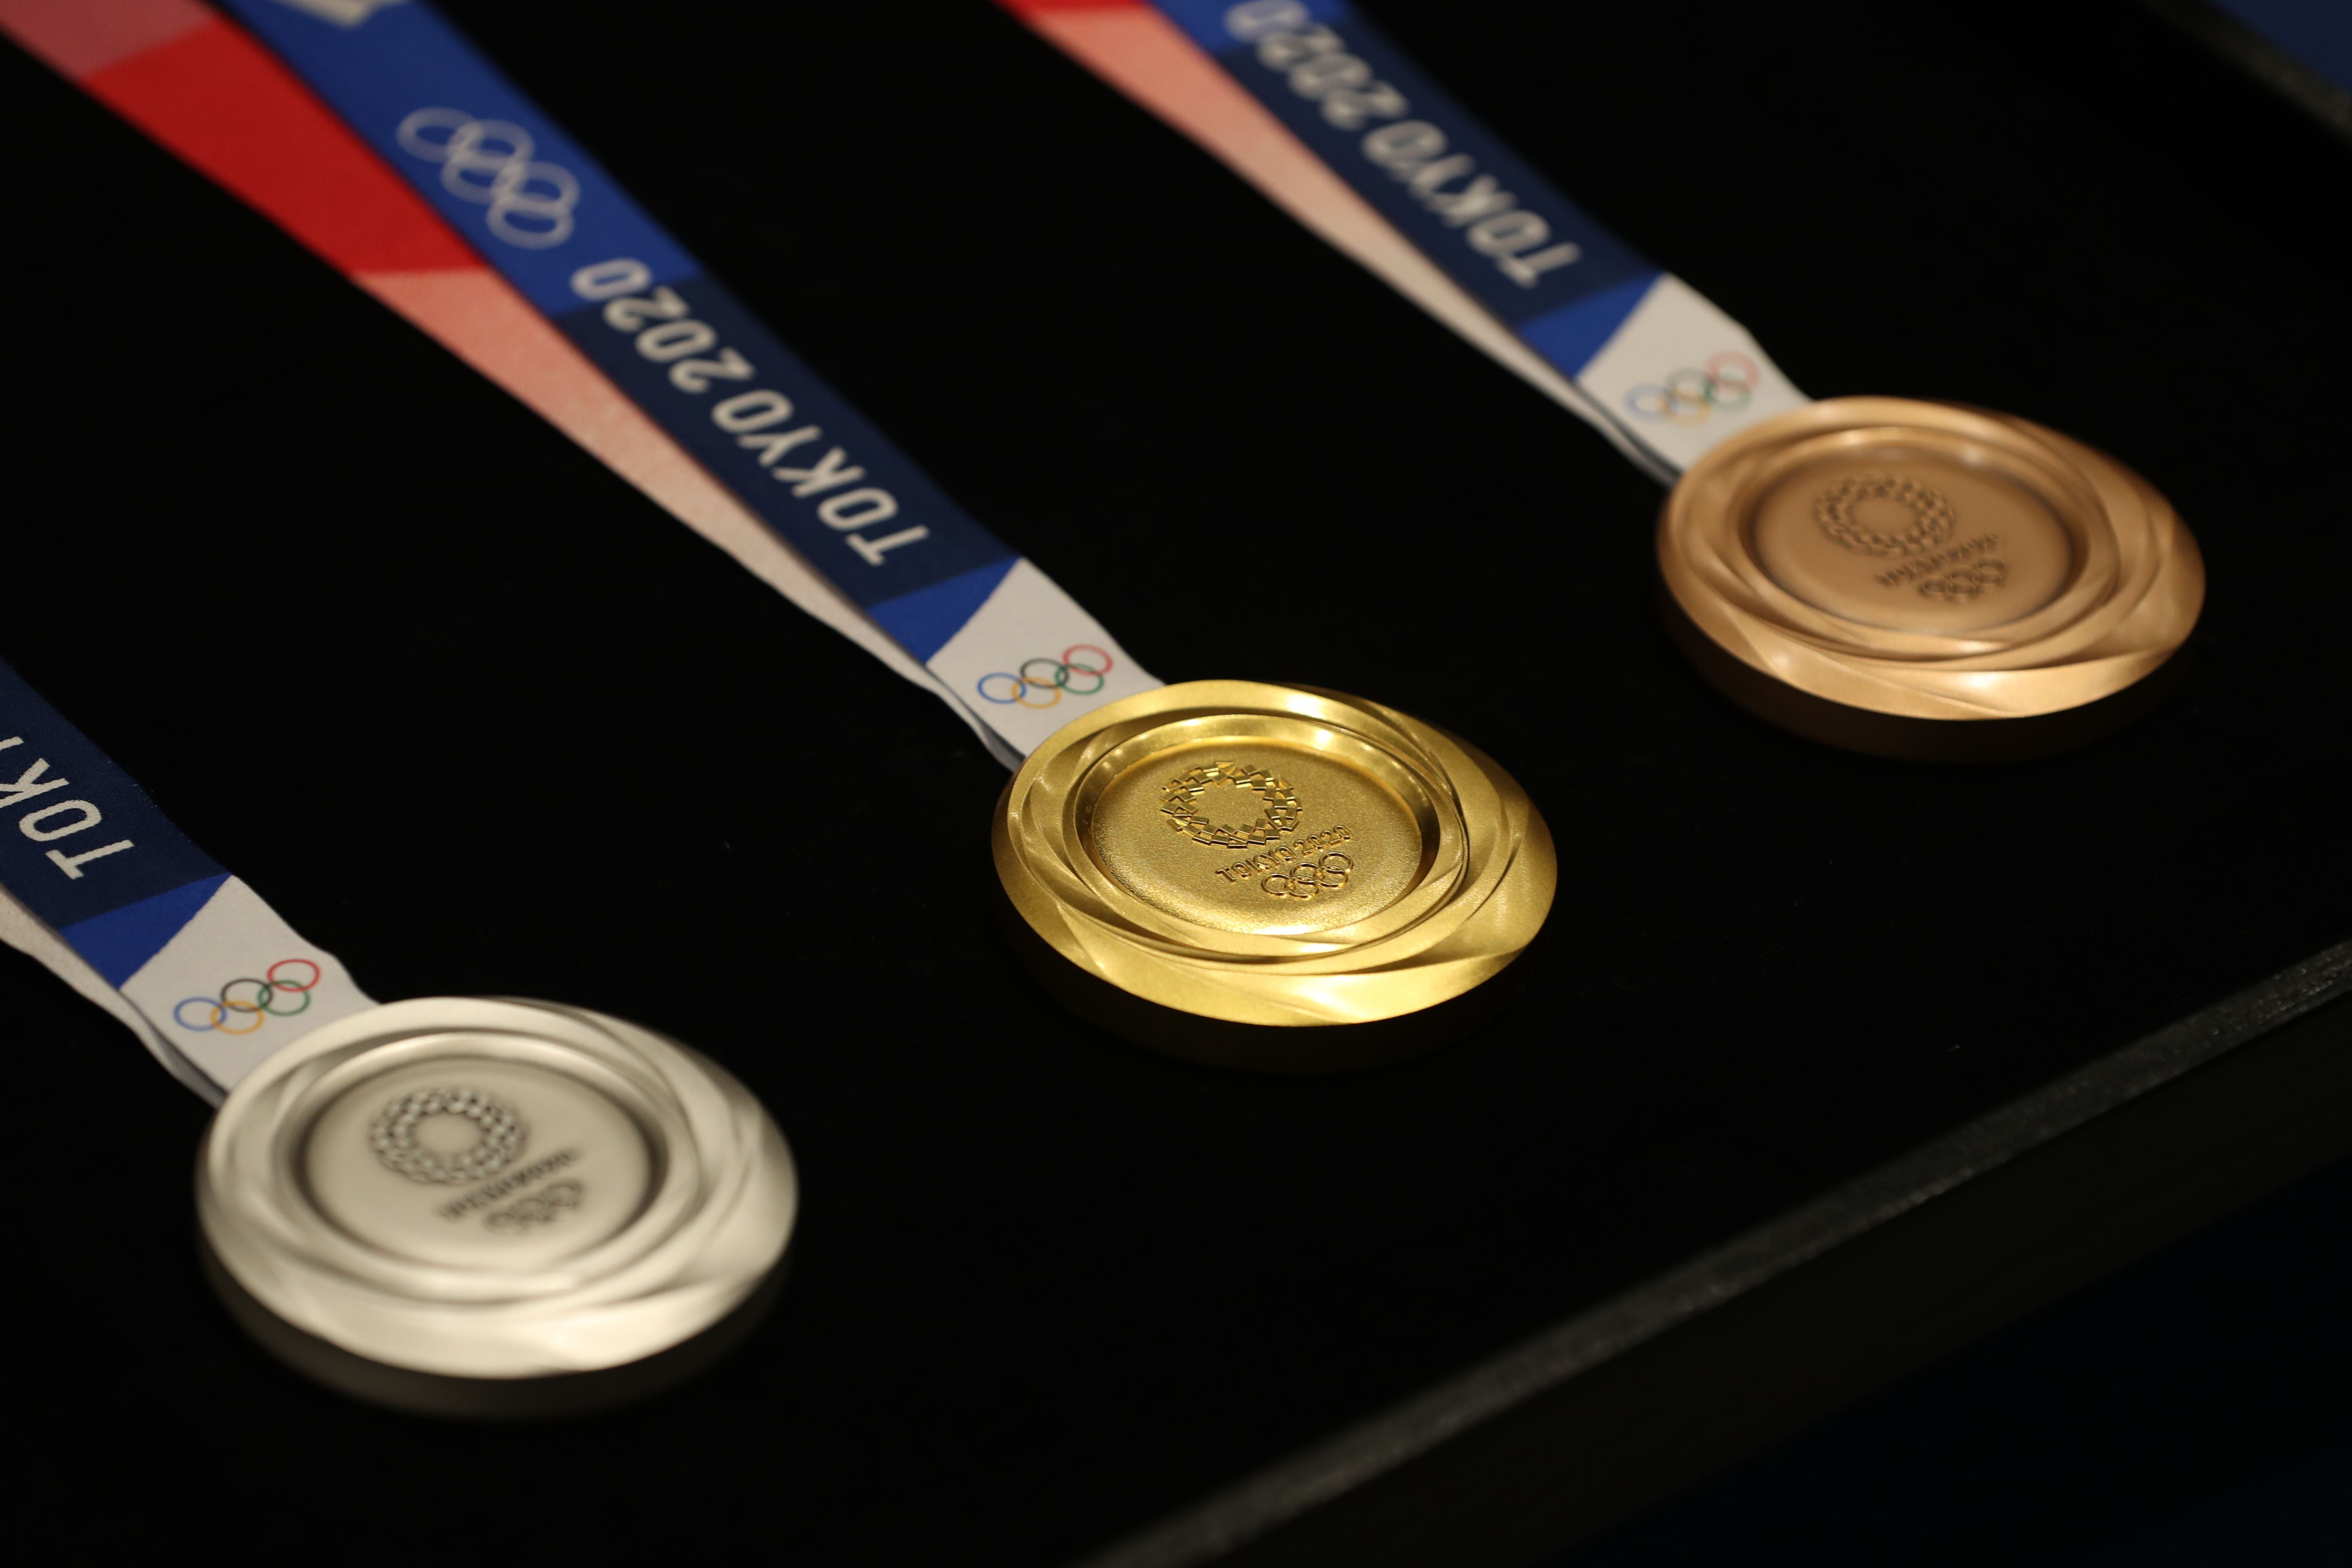 Olympic event winners will have to take medals from a tray and place them around their own necks